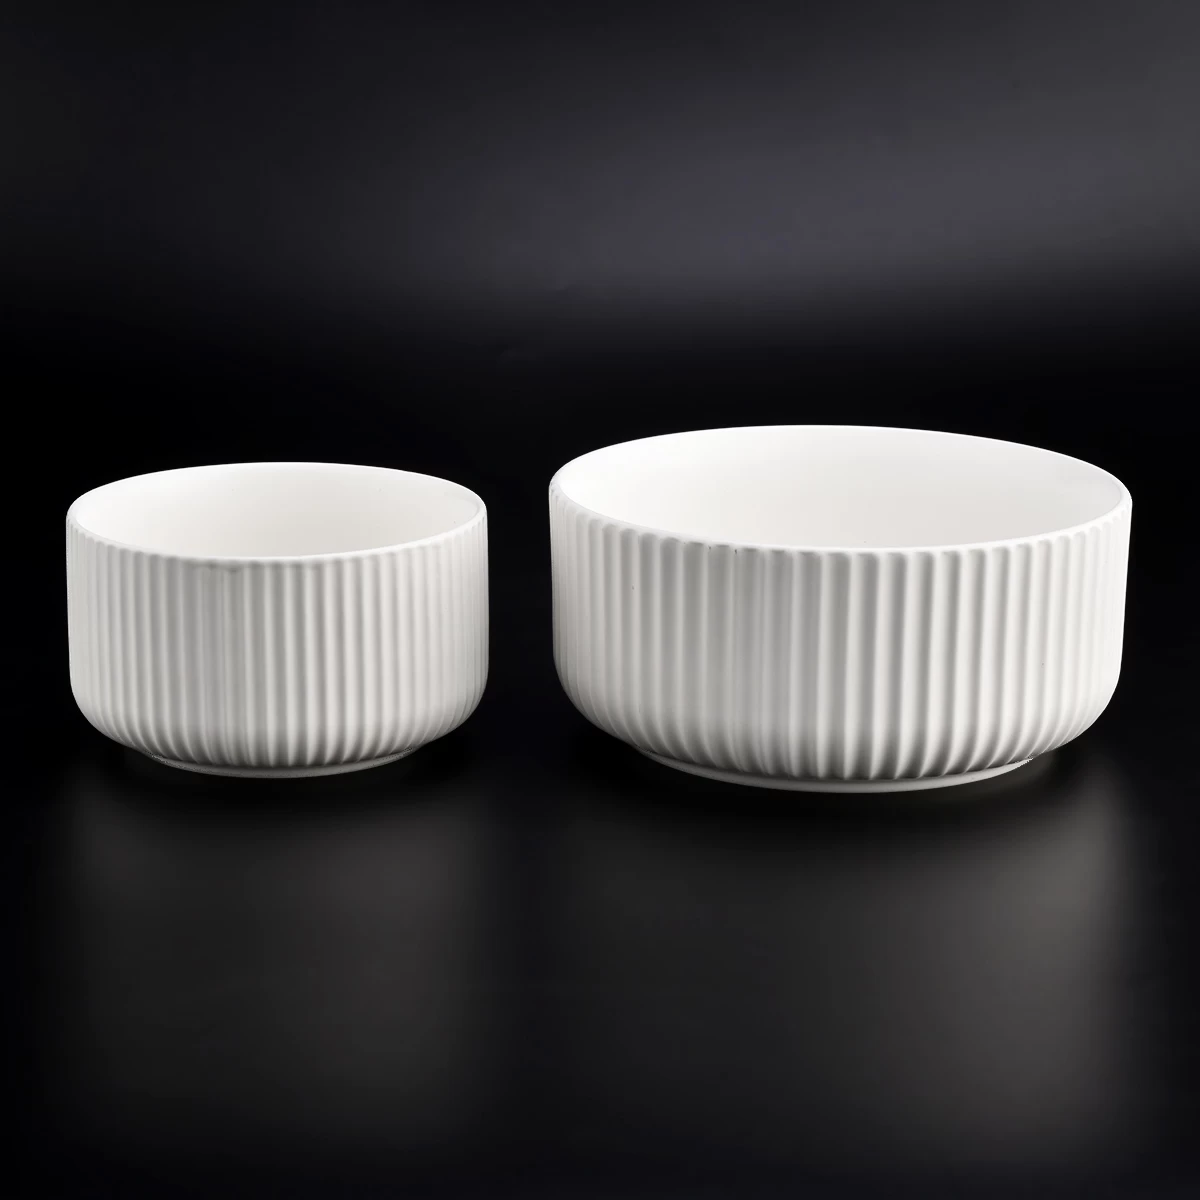 strips ceramic candle containers